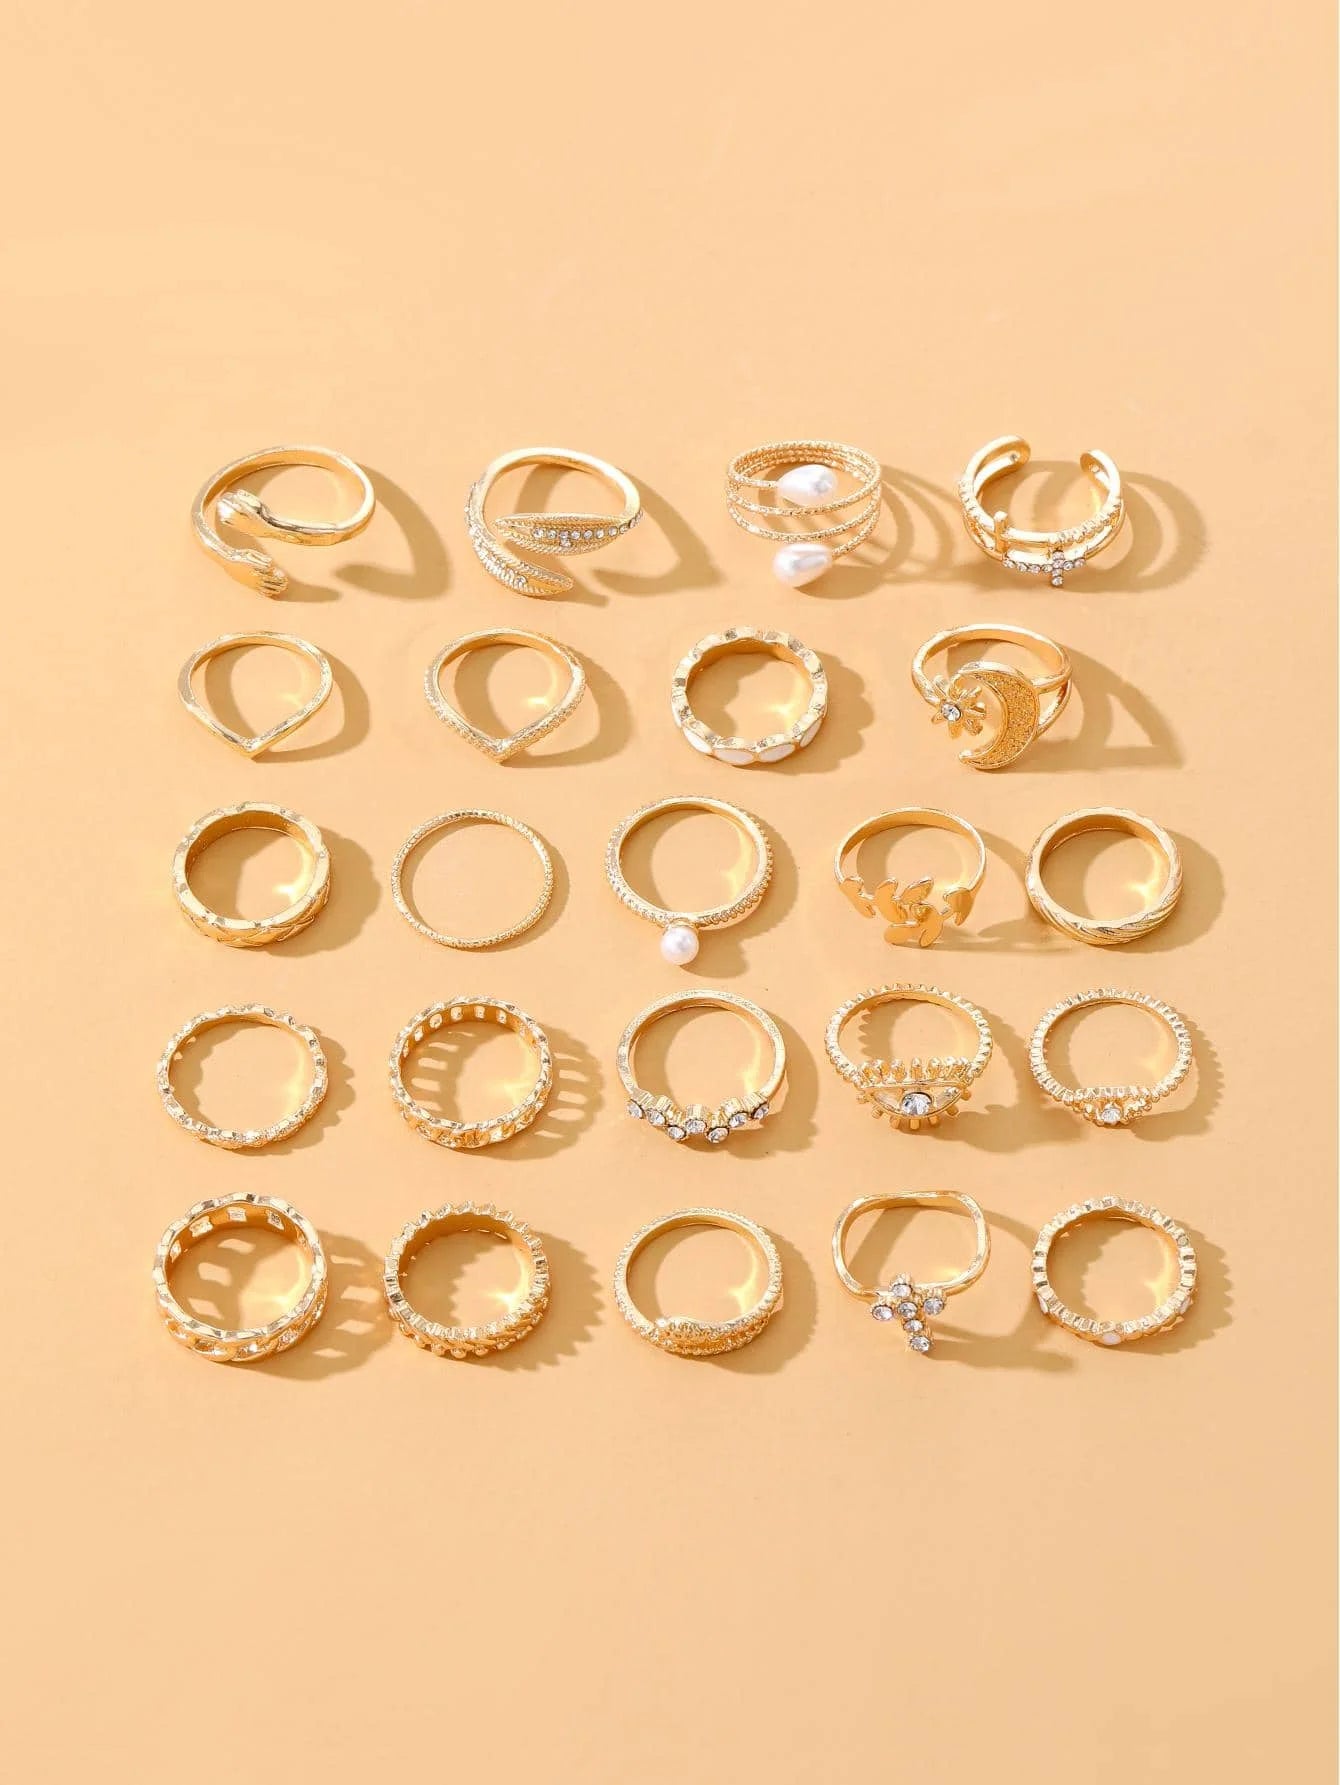 22 Pcs/Set of Fashionable Punk Style Cartoon Pearl Rings Set For Women Parties Festivals Gifts Daily Versatility Jewelry 2023